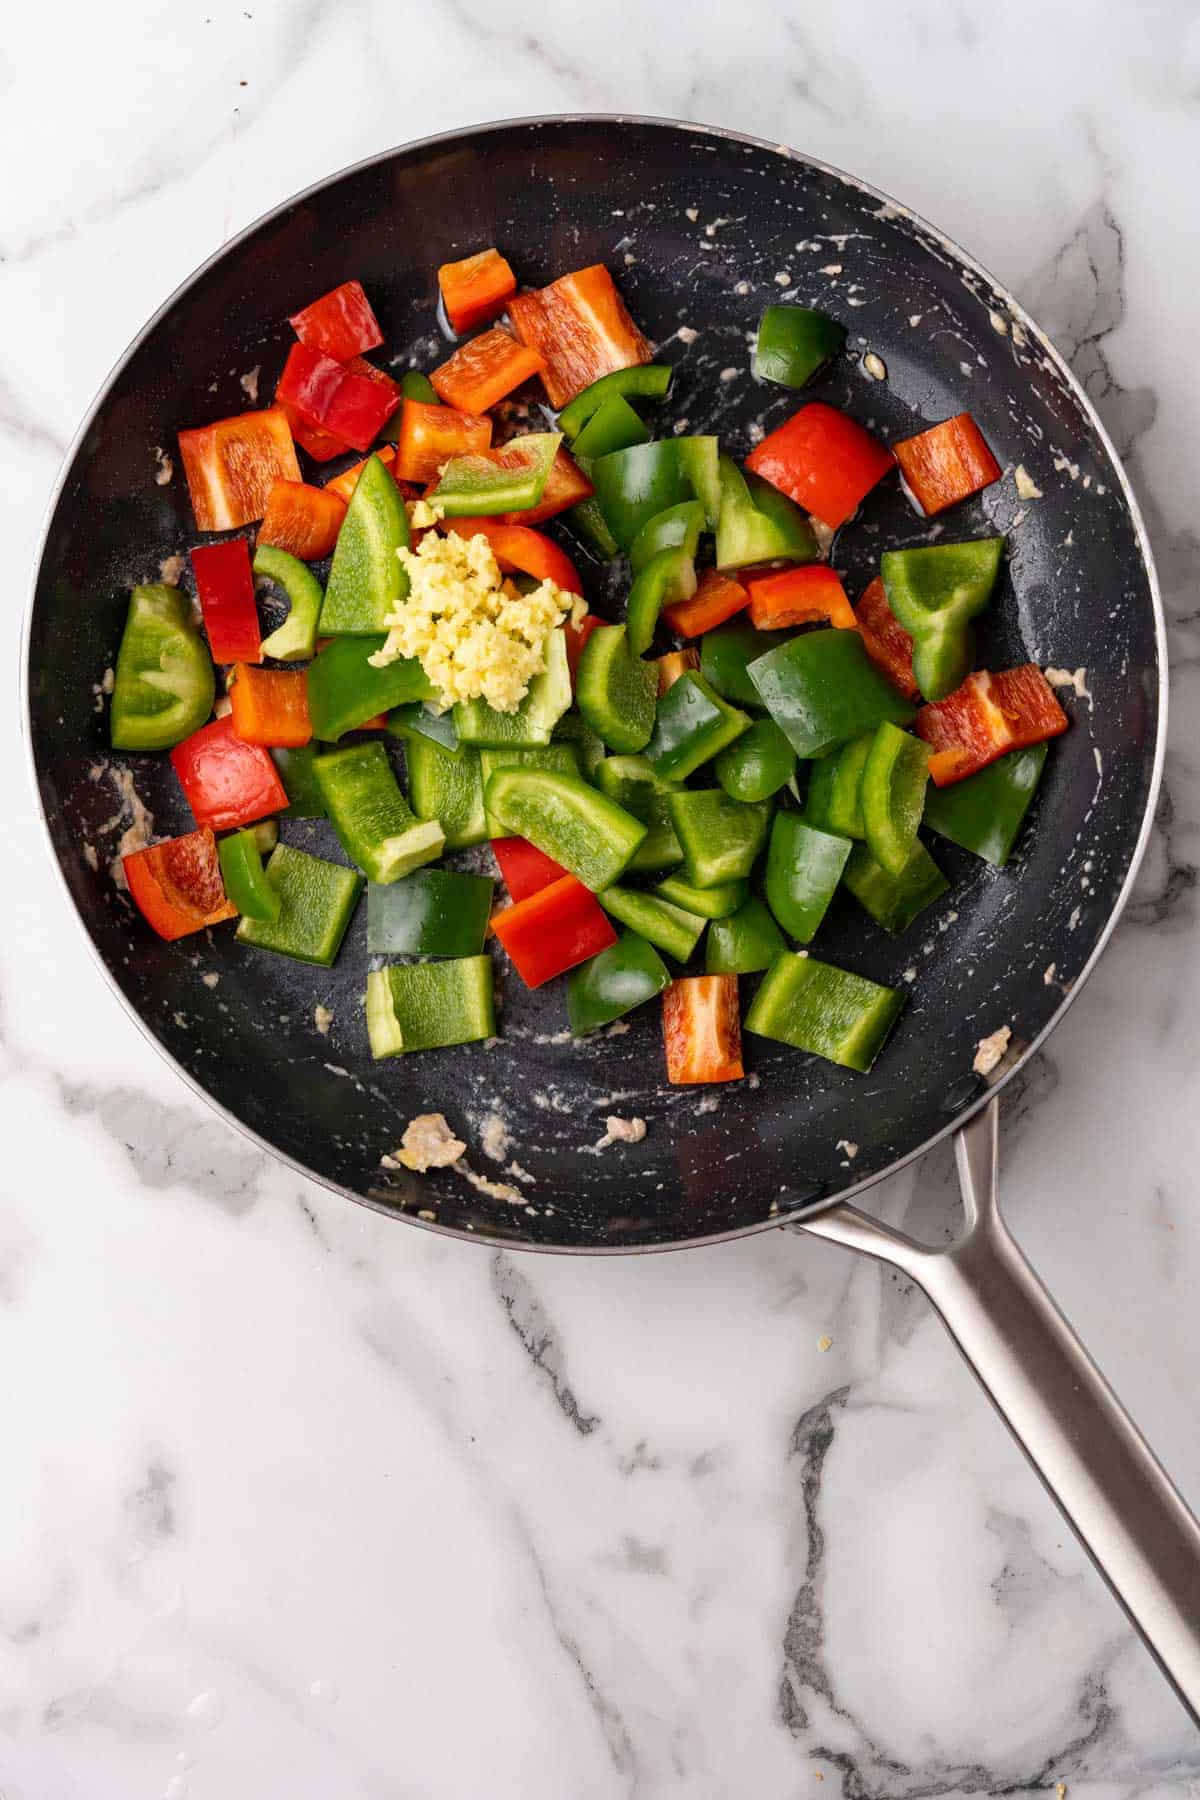 Vegetables and ginger added to black skillet, as seen from above on a white marble surface